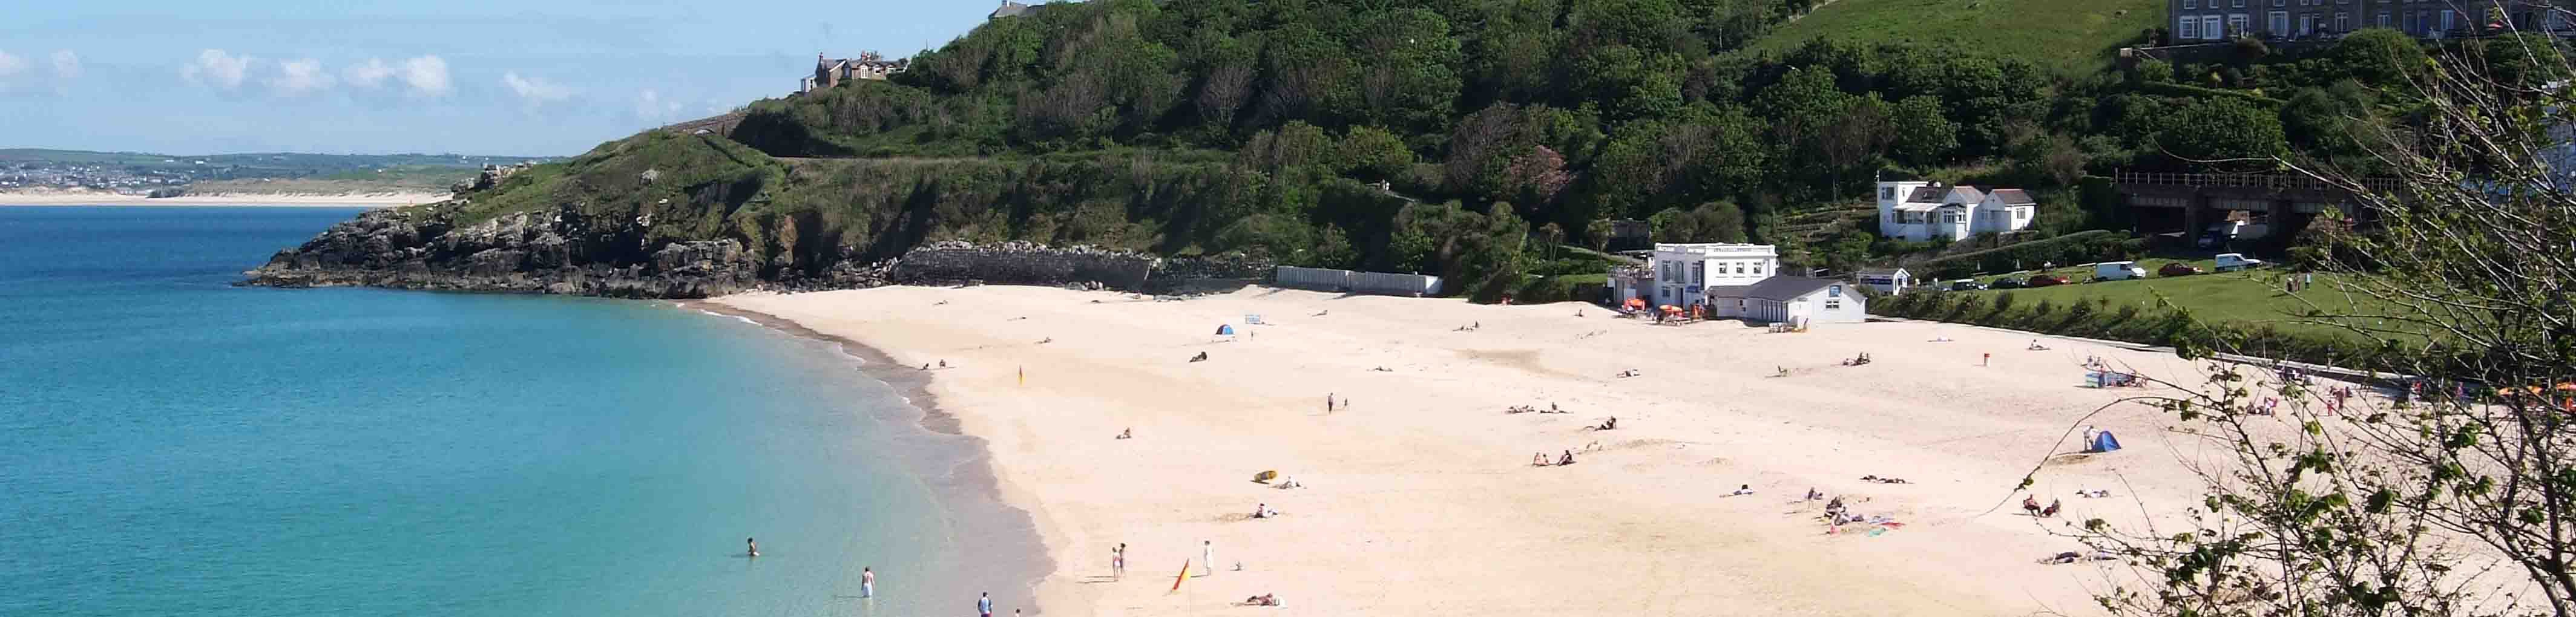 Beaches in St Ives 